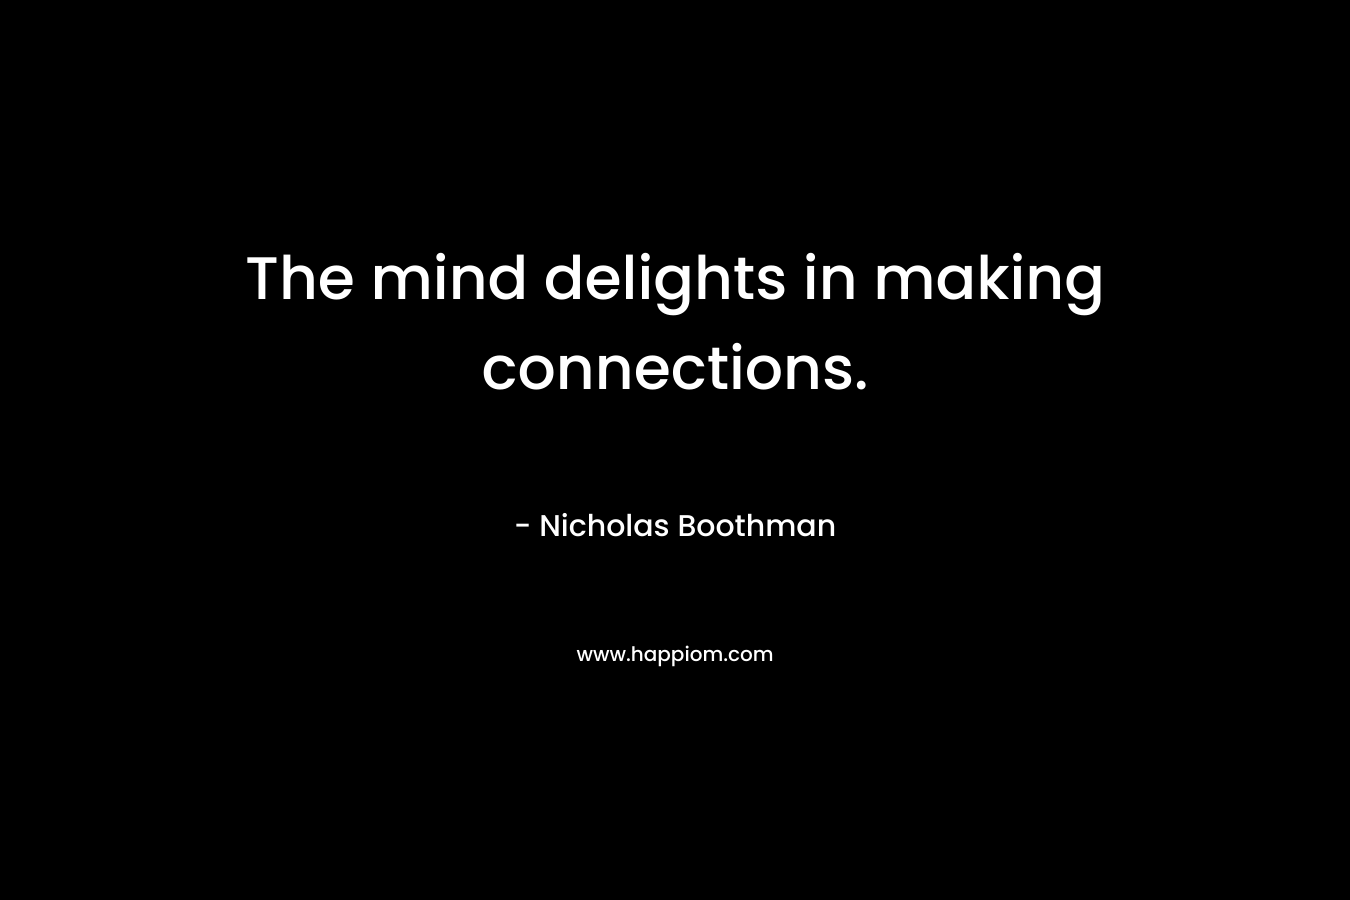 The mind delights in making connections.